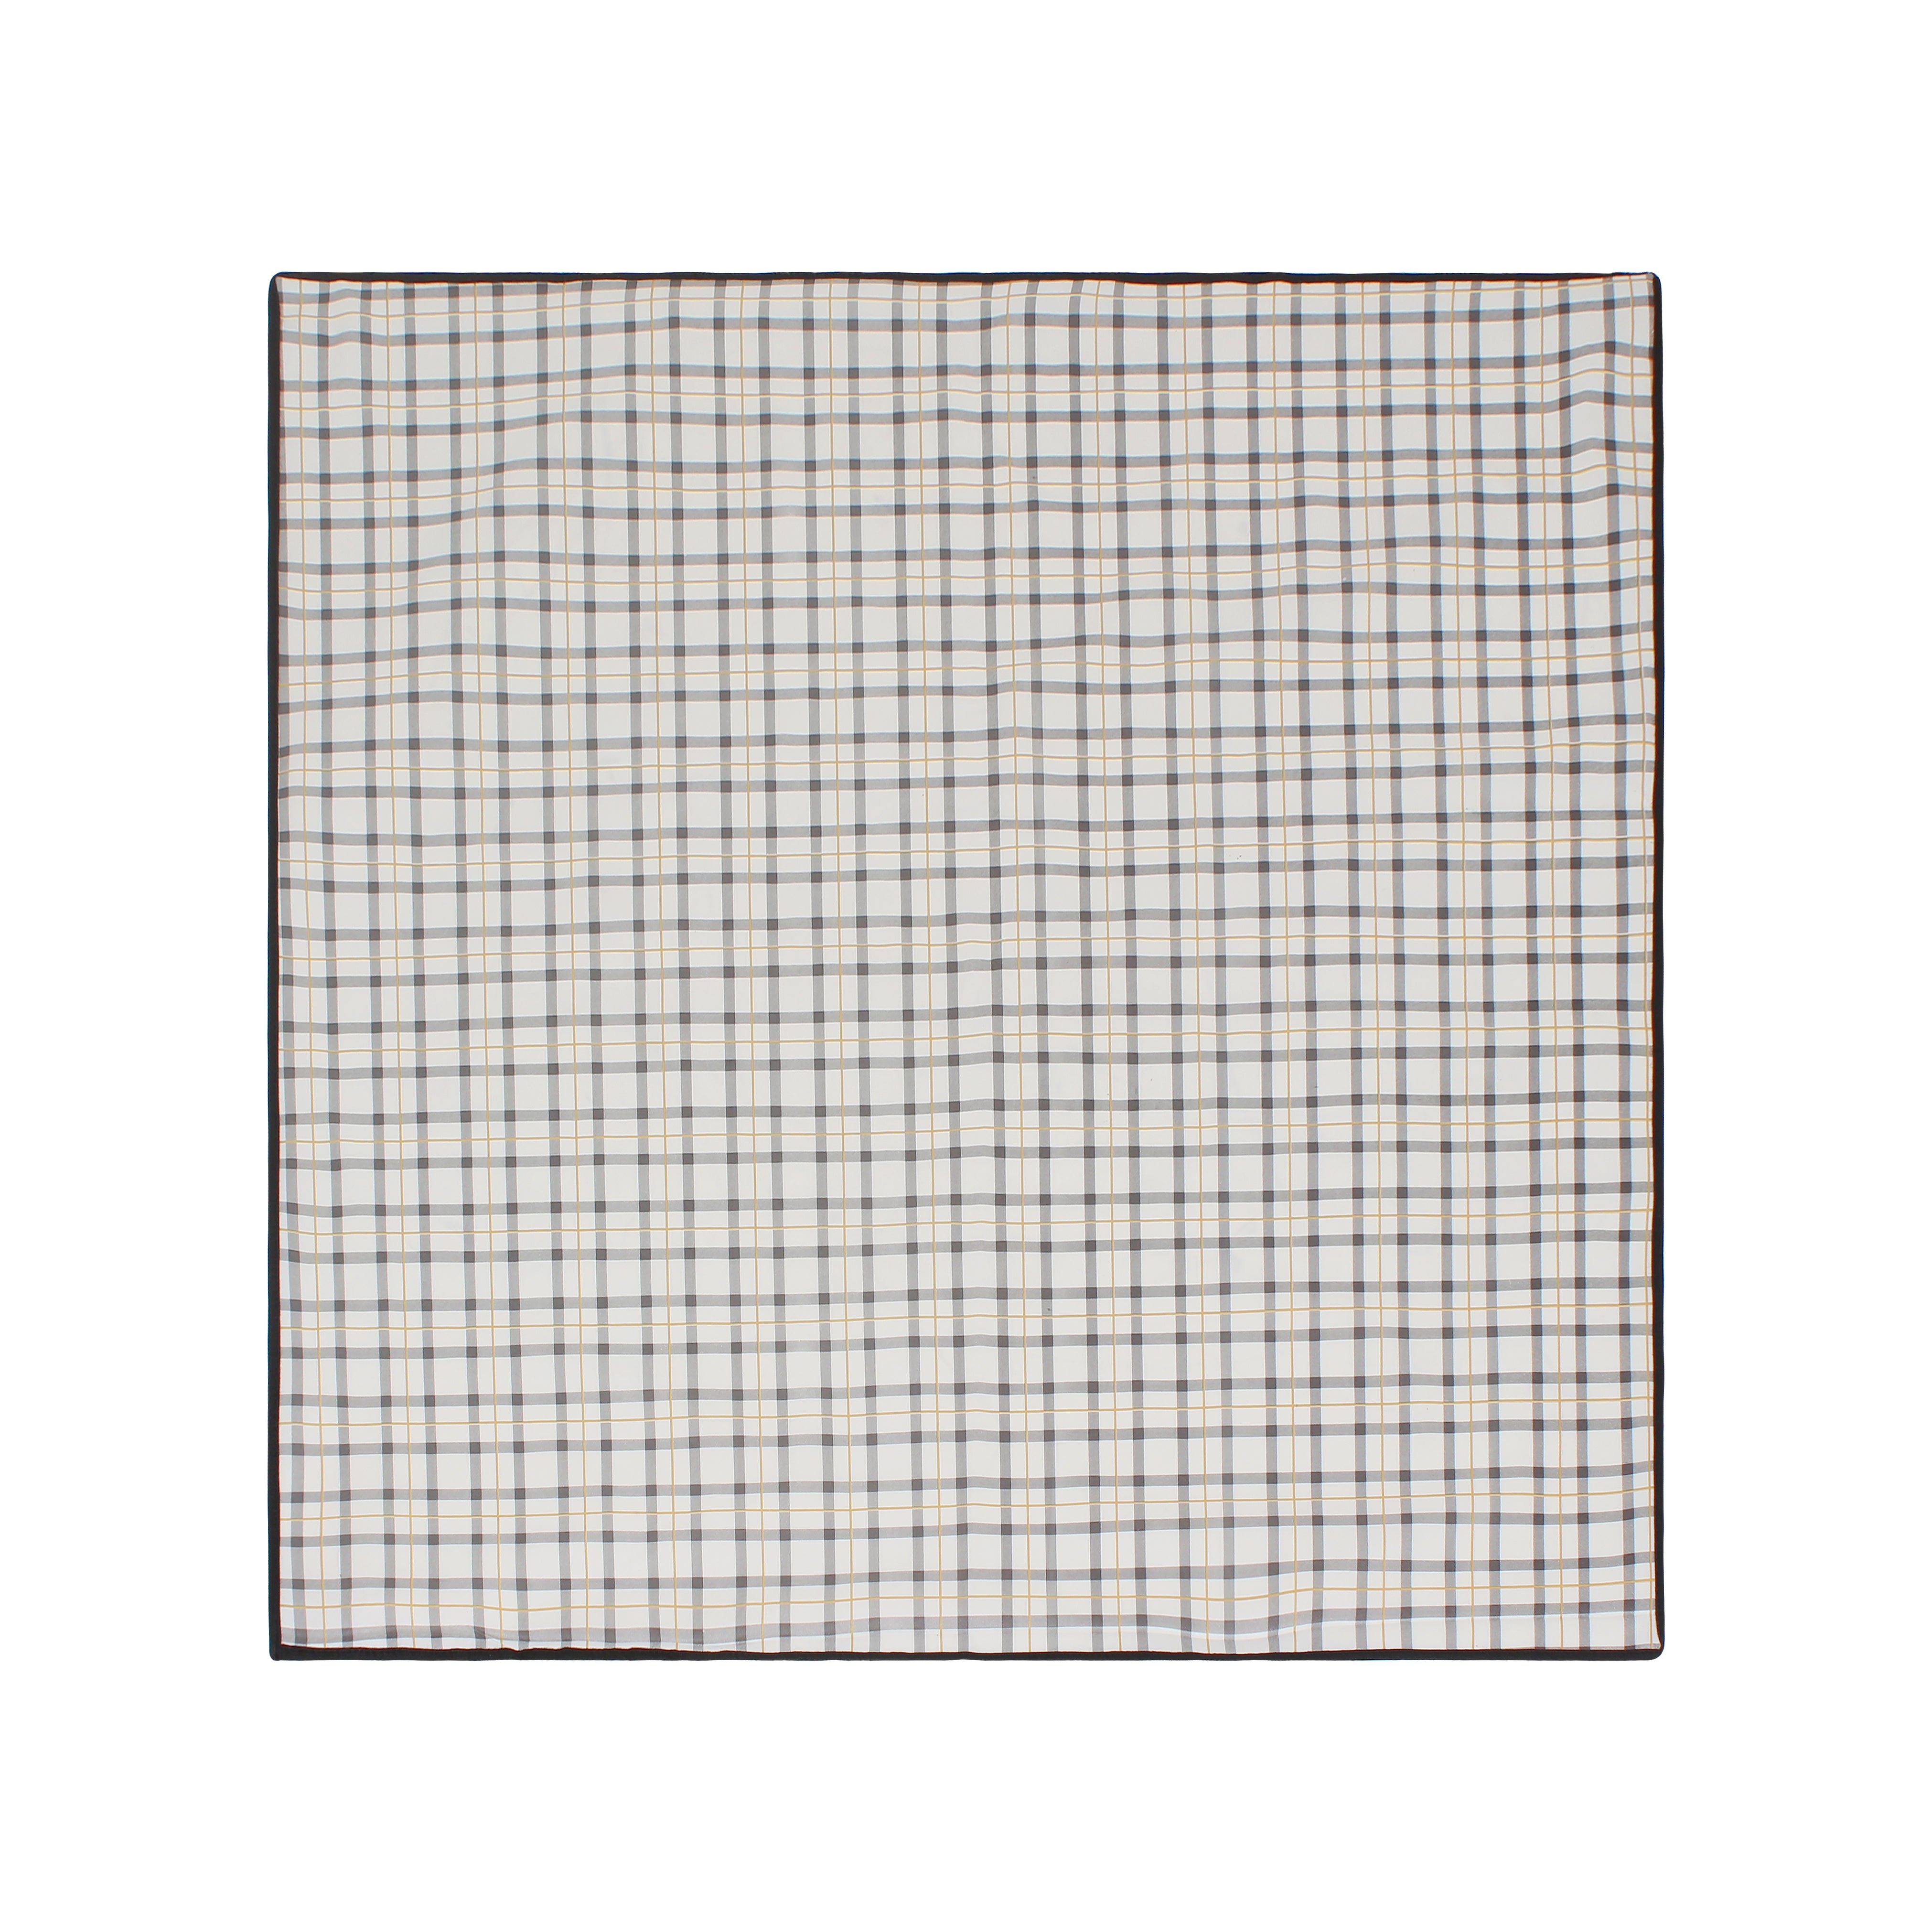 Waterproof & Oil Proof Bed Server Square Mat, CA04 - Dream Care Furnishings Private Limited